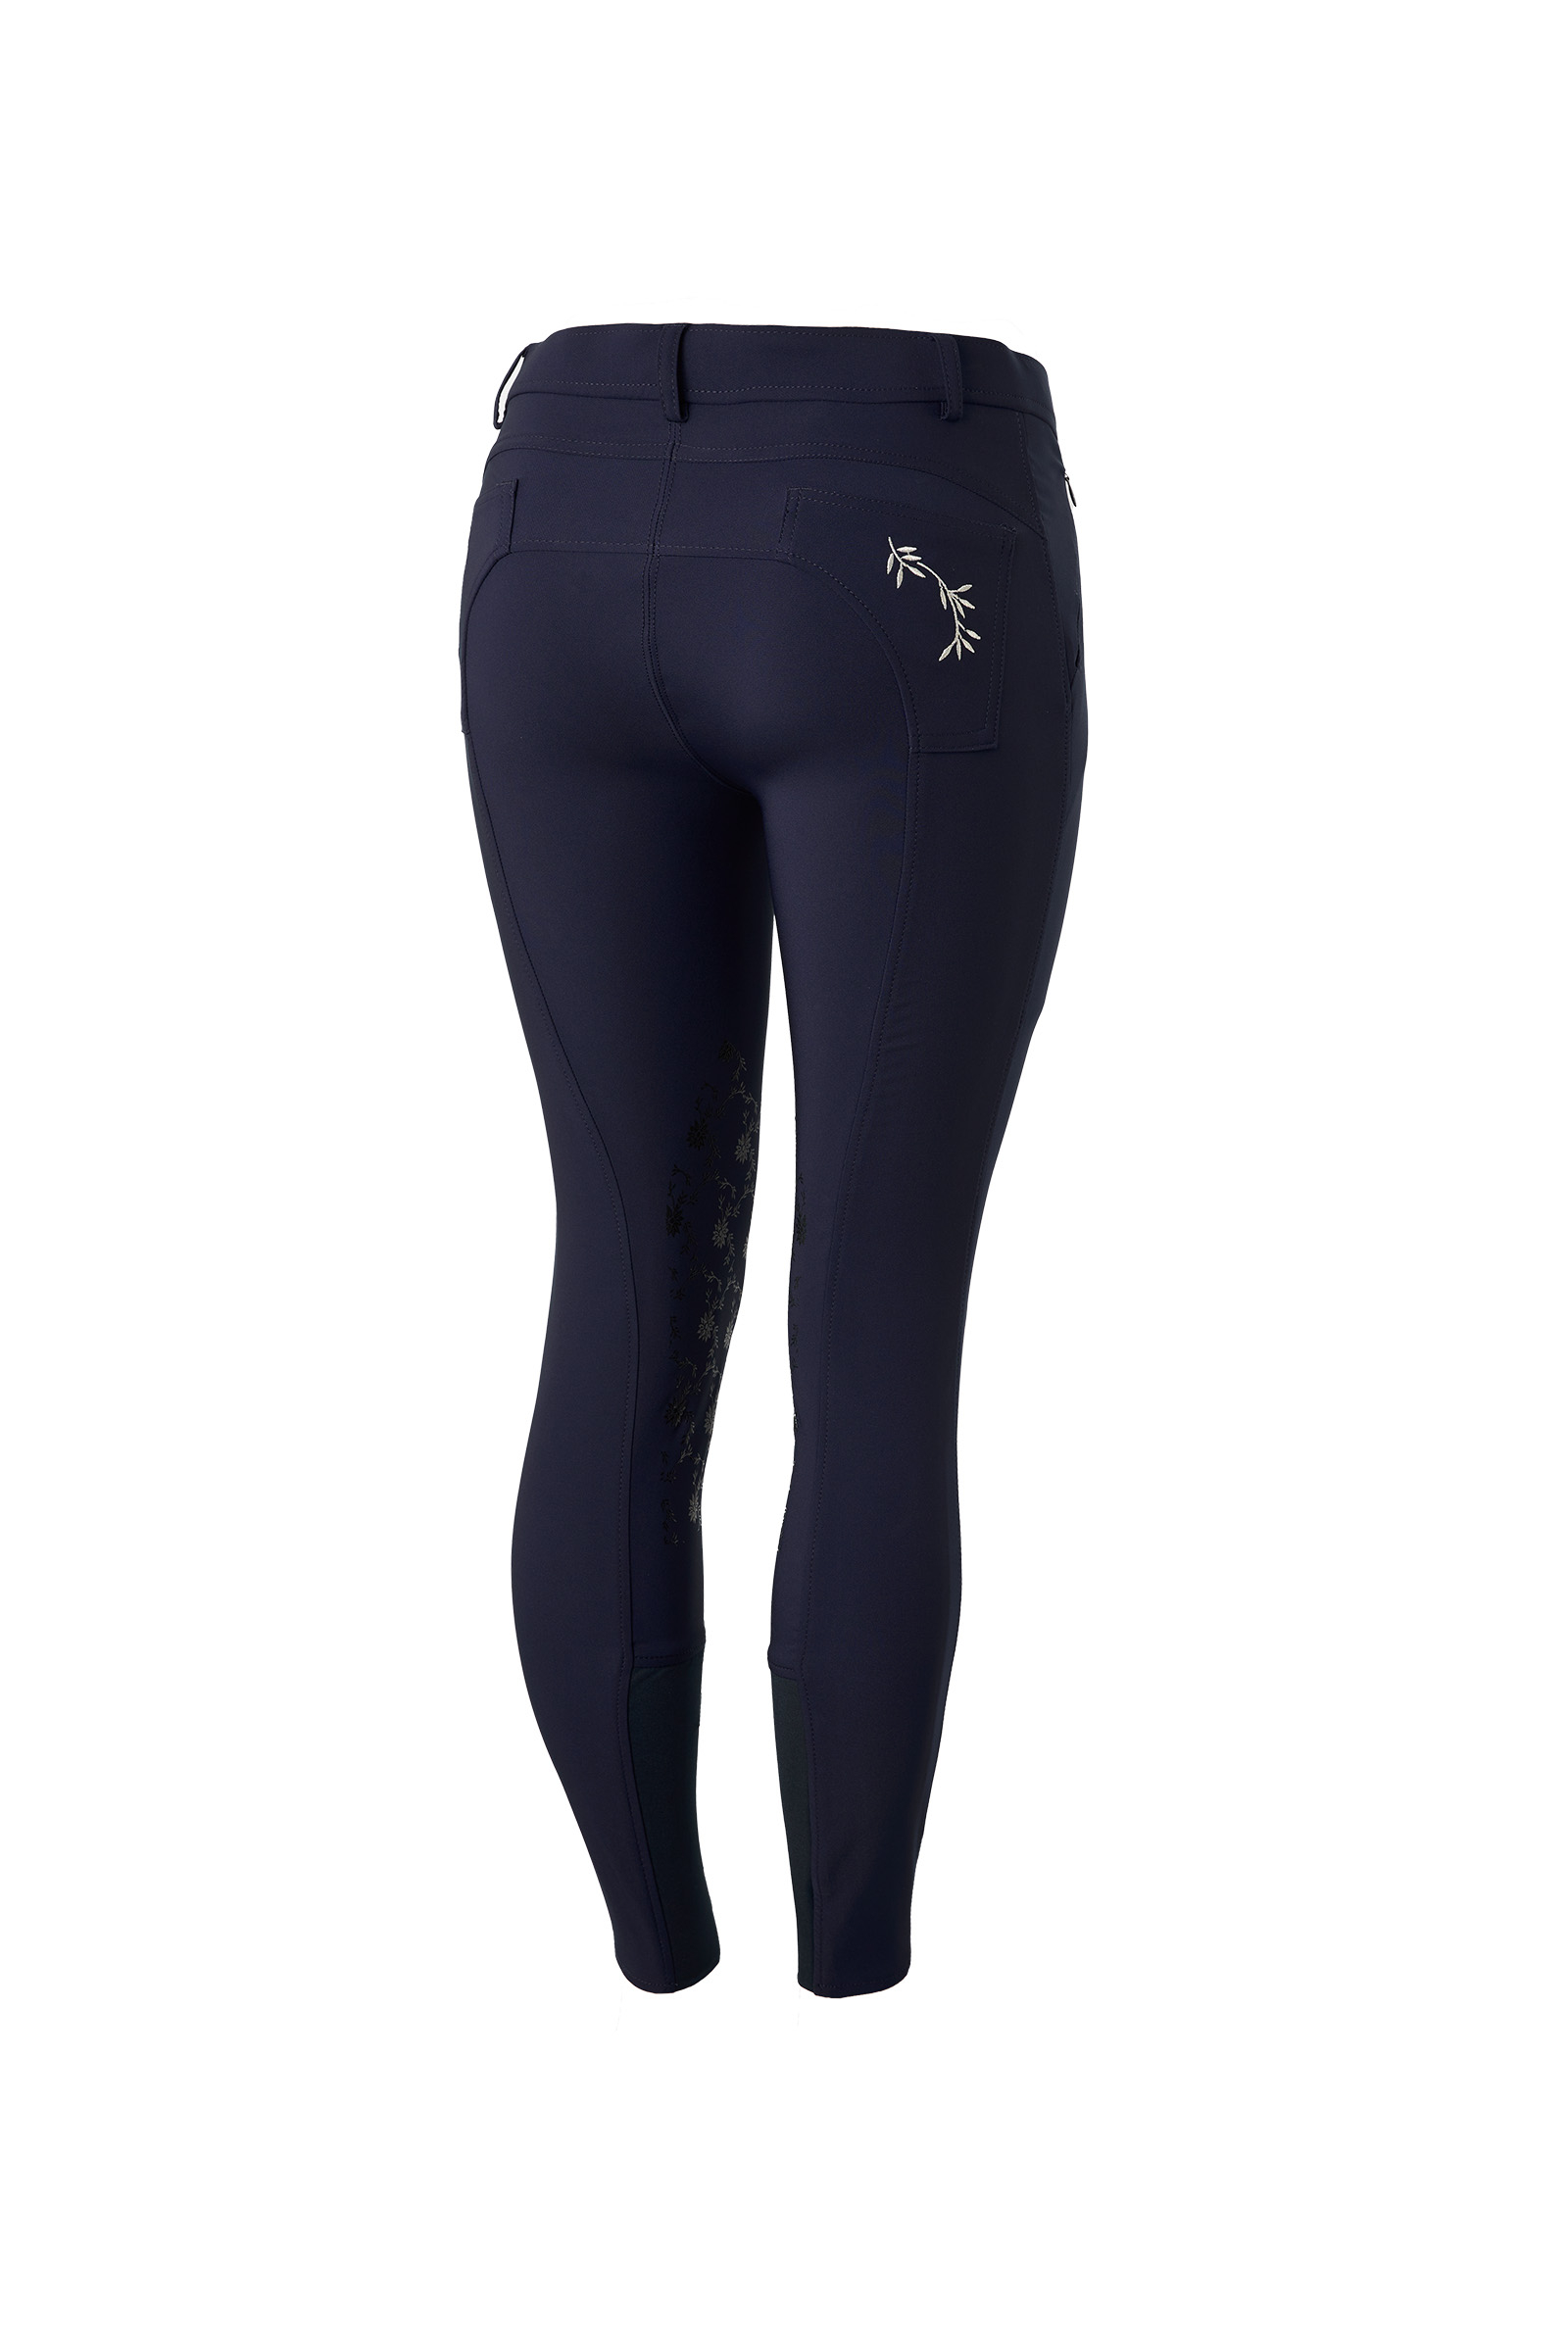 Riding Technical Breeches ROYAL RIDE J Knee Patch Silicon, Cavalliera  Classics 23-24